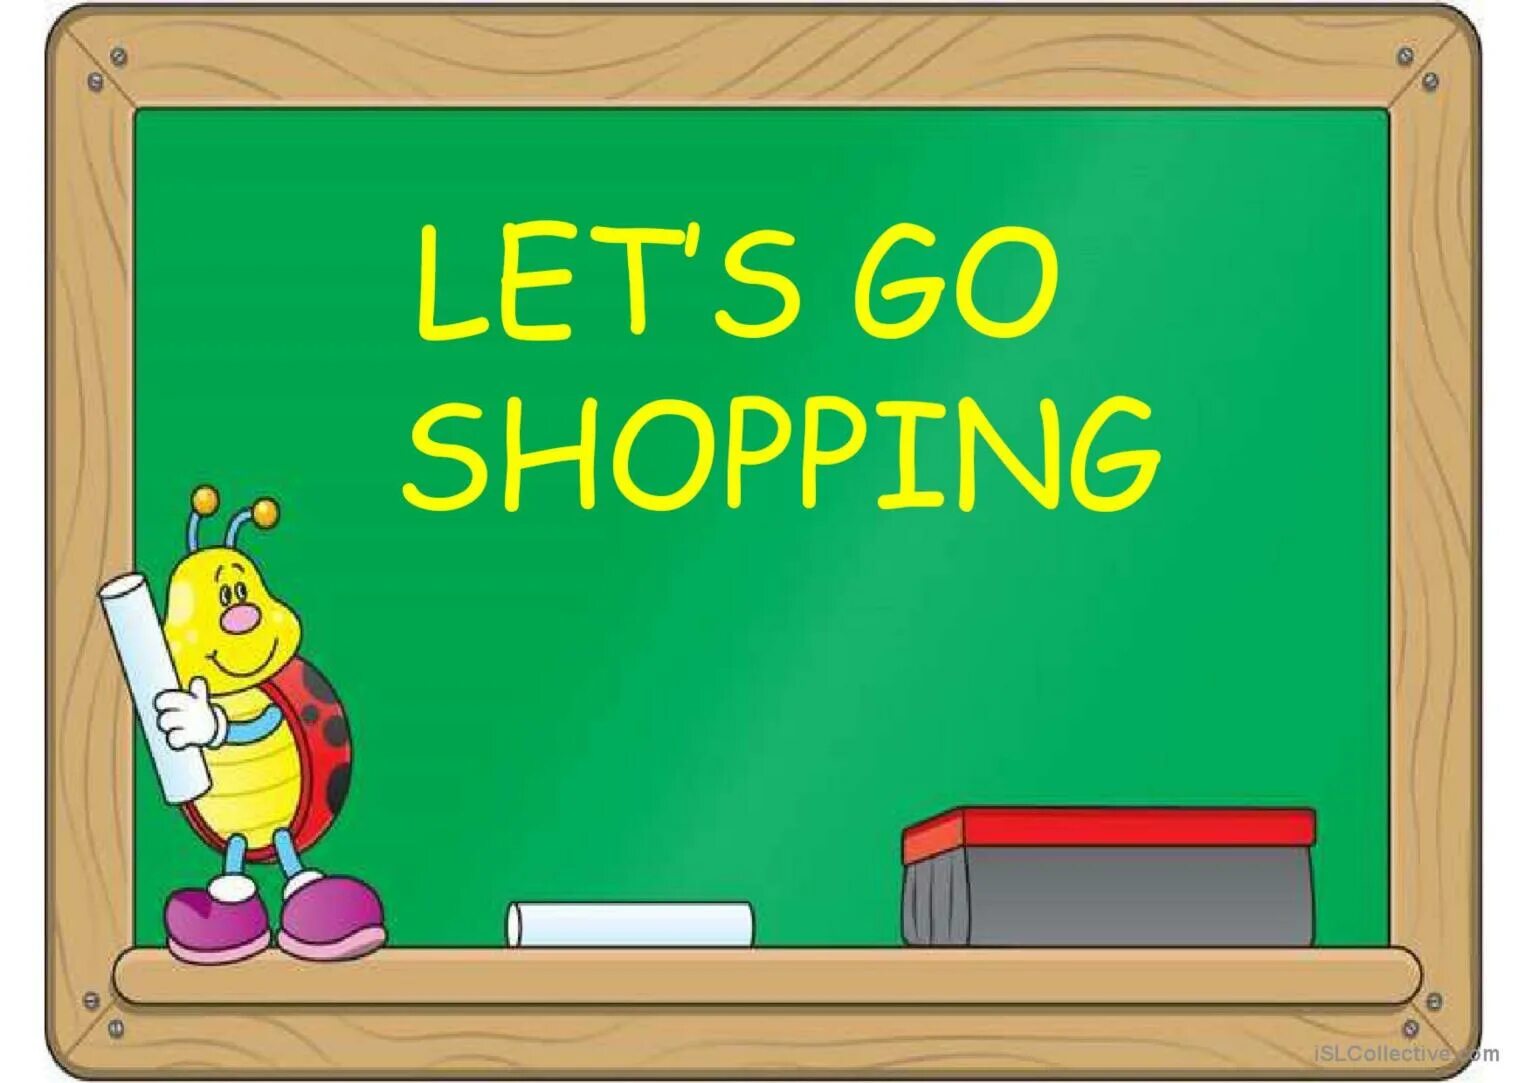 You often go shopping. Lets go shopping задания. Lets go shopping. Летс го шоп. Let’s go shopping картинки.